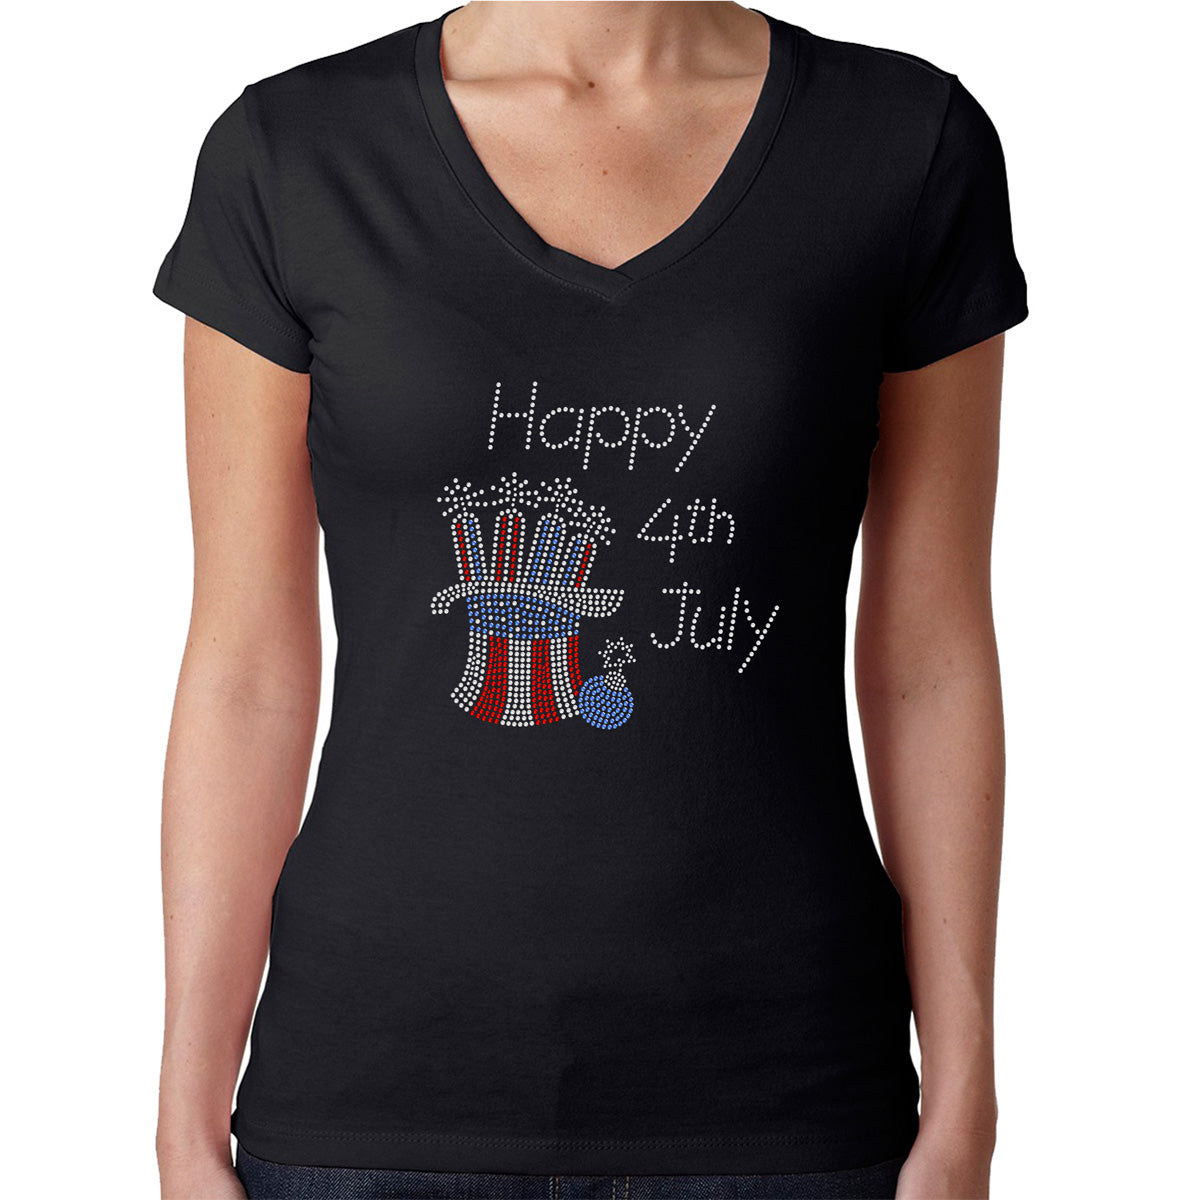 Womens T-Shirt Rhinestone Bling Black Fitted Tee Happy 4th of July Fireworks